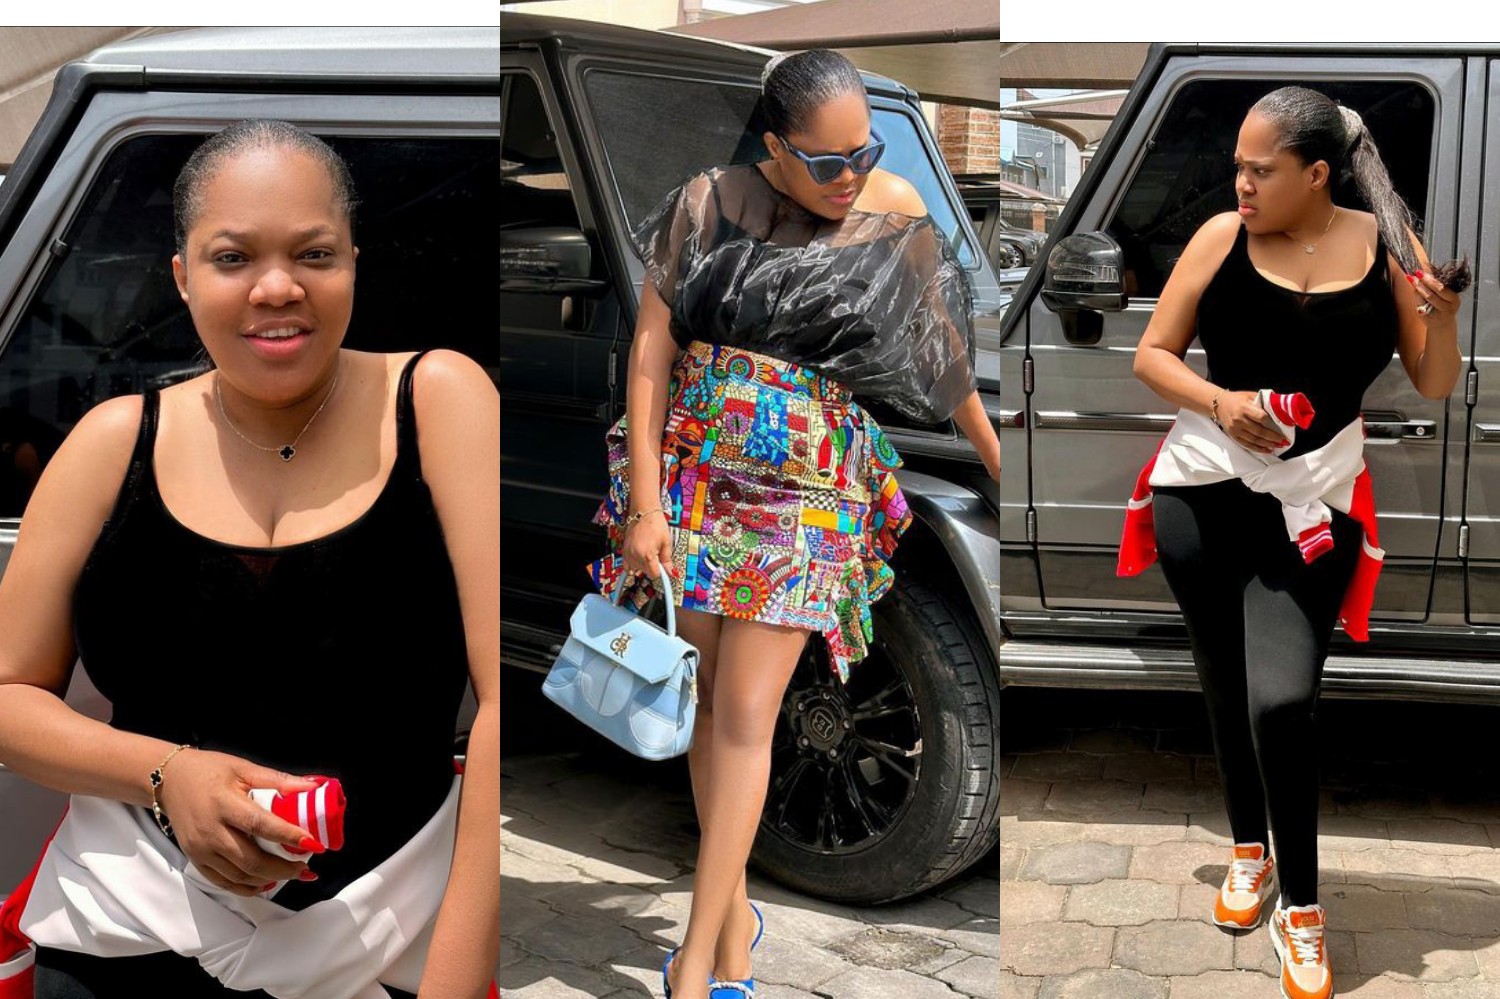 “Toyin Small Small Oo, You are Becoming Lean Oo, Hope You are Fine Sha???” – Fans Shows Their Concerns As actress Toyin Abraham makes powerful self-affirmation (WATCH)